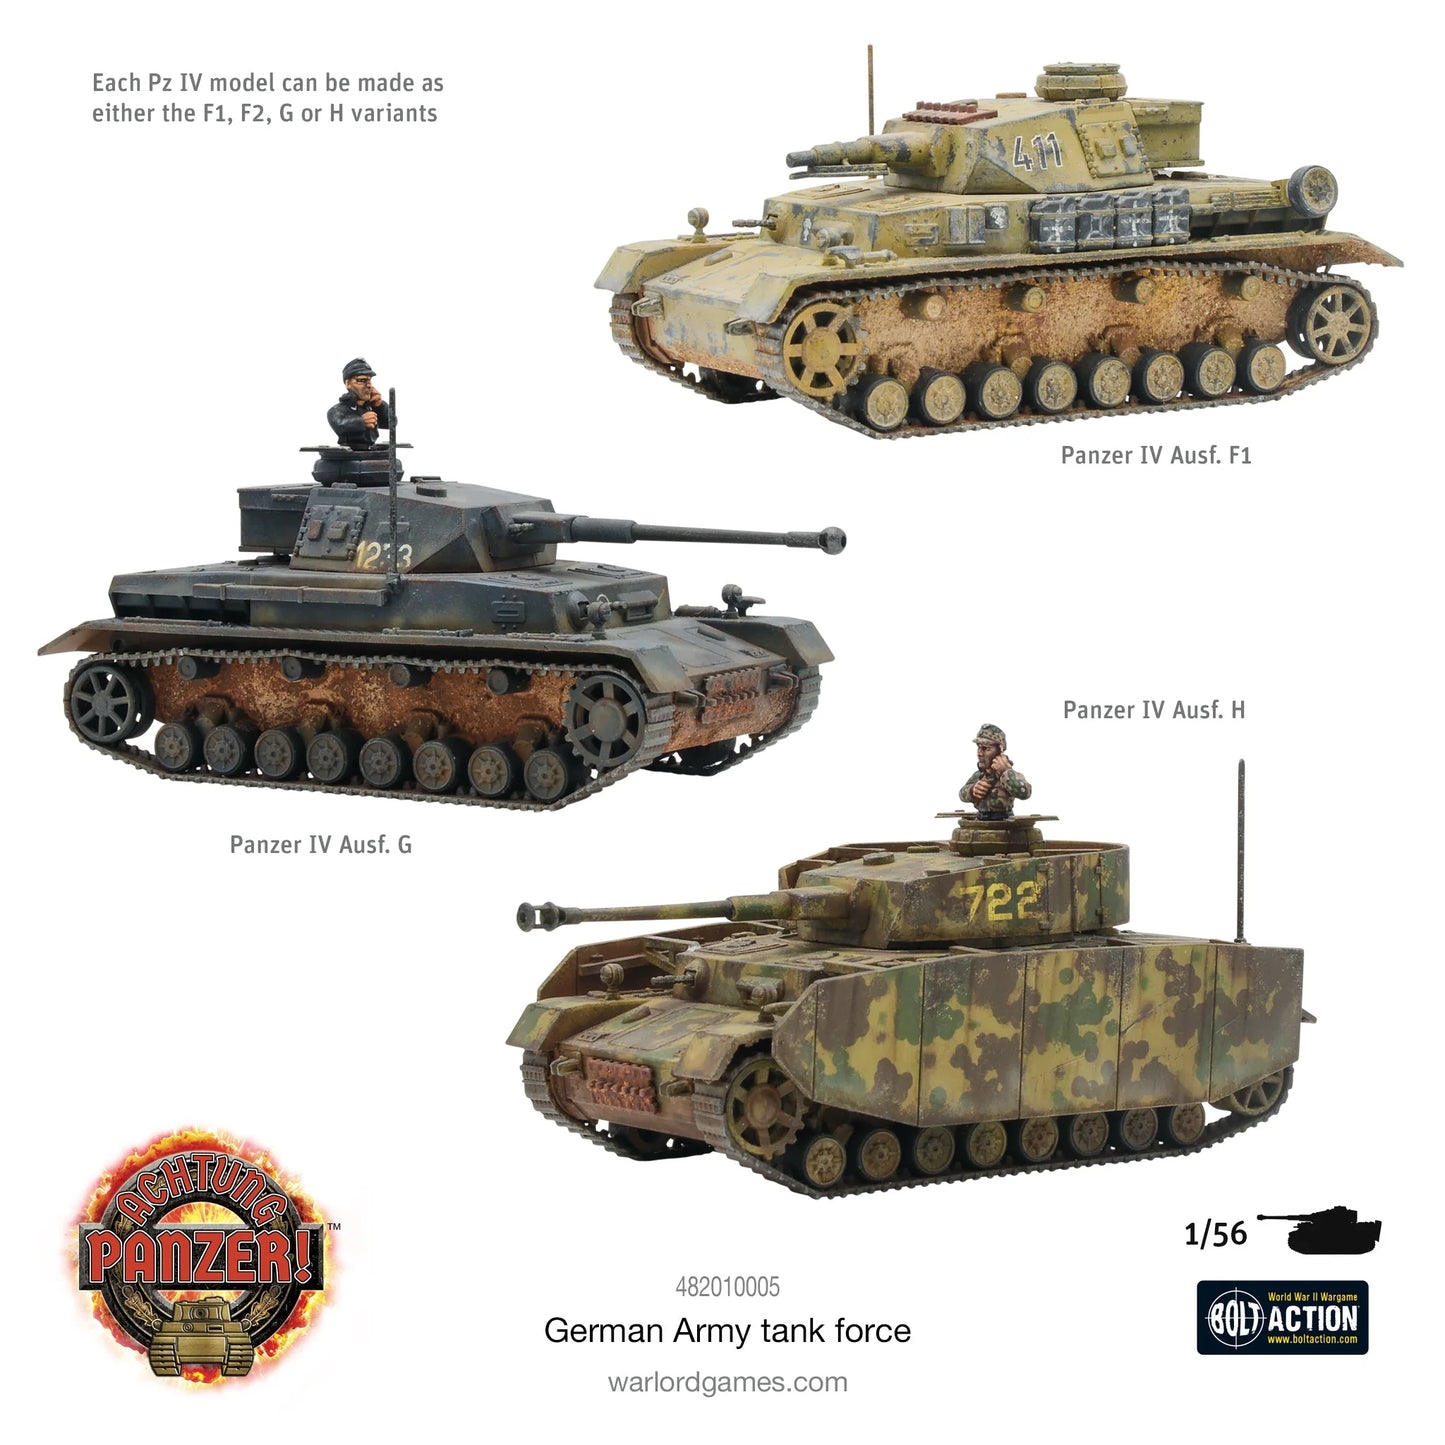 Achtung Panzer! German Army Tank Force - 482010005